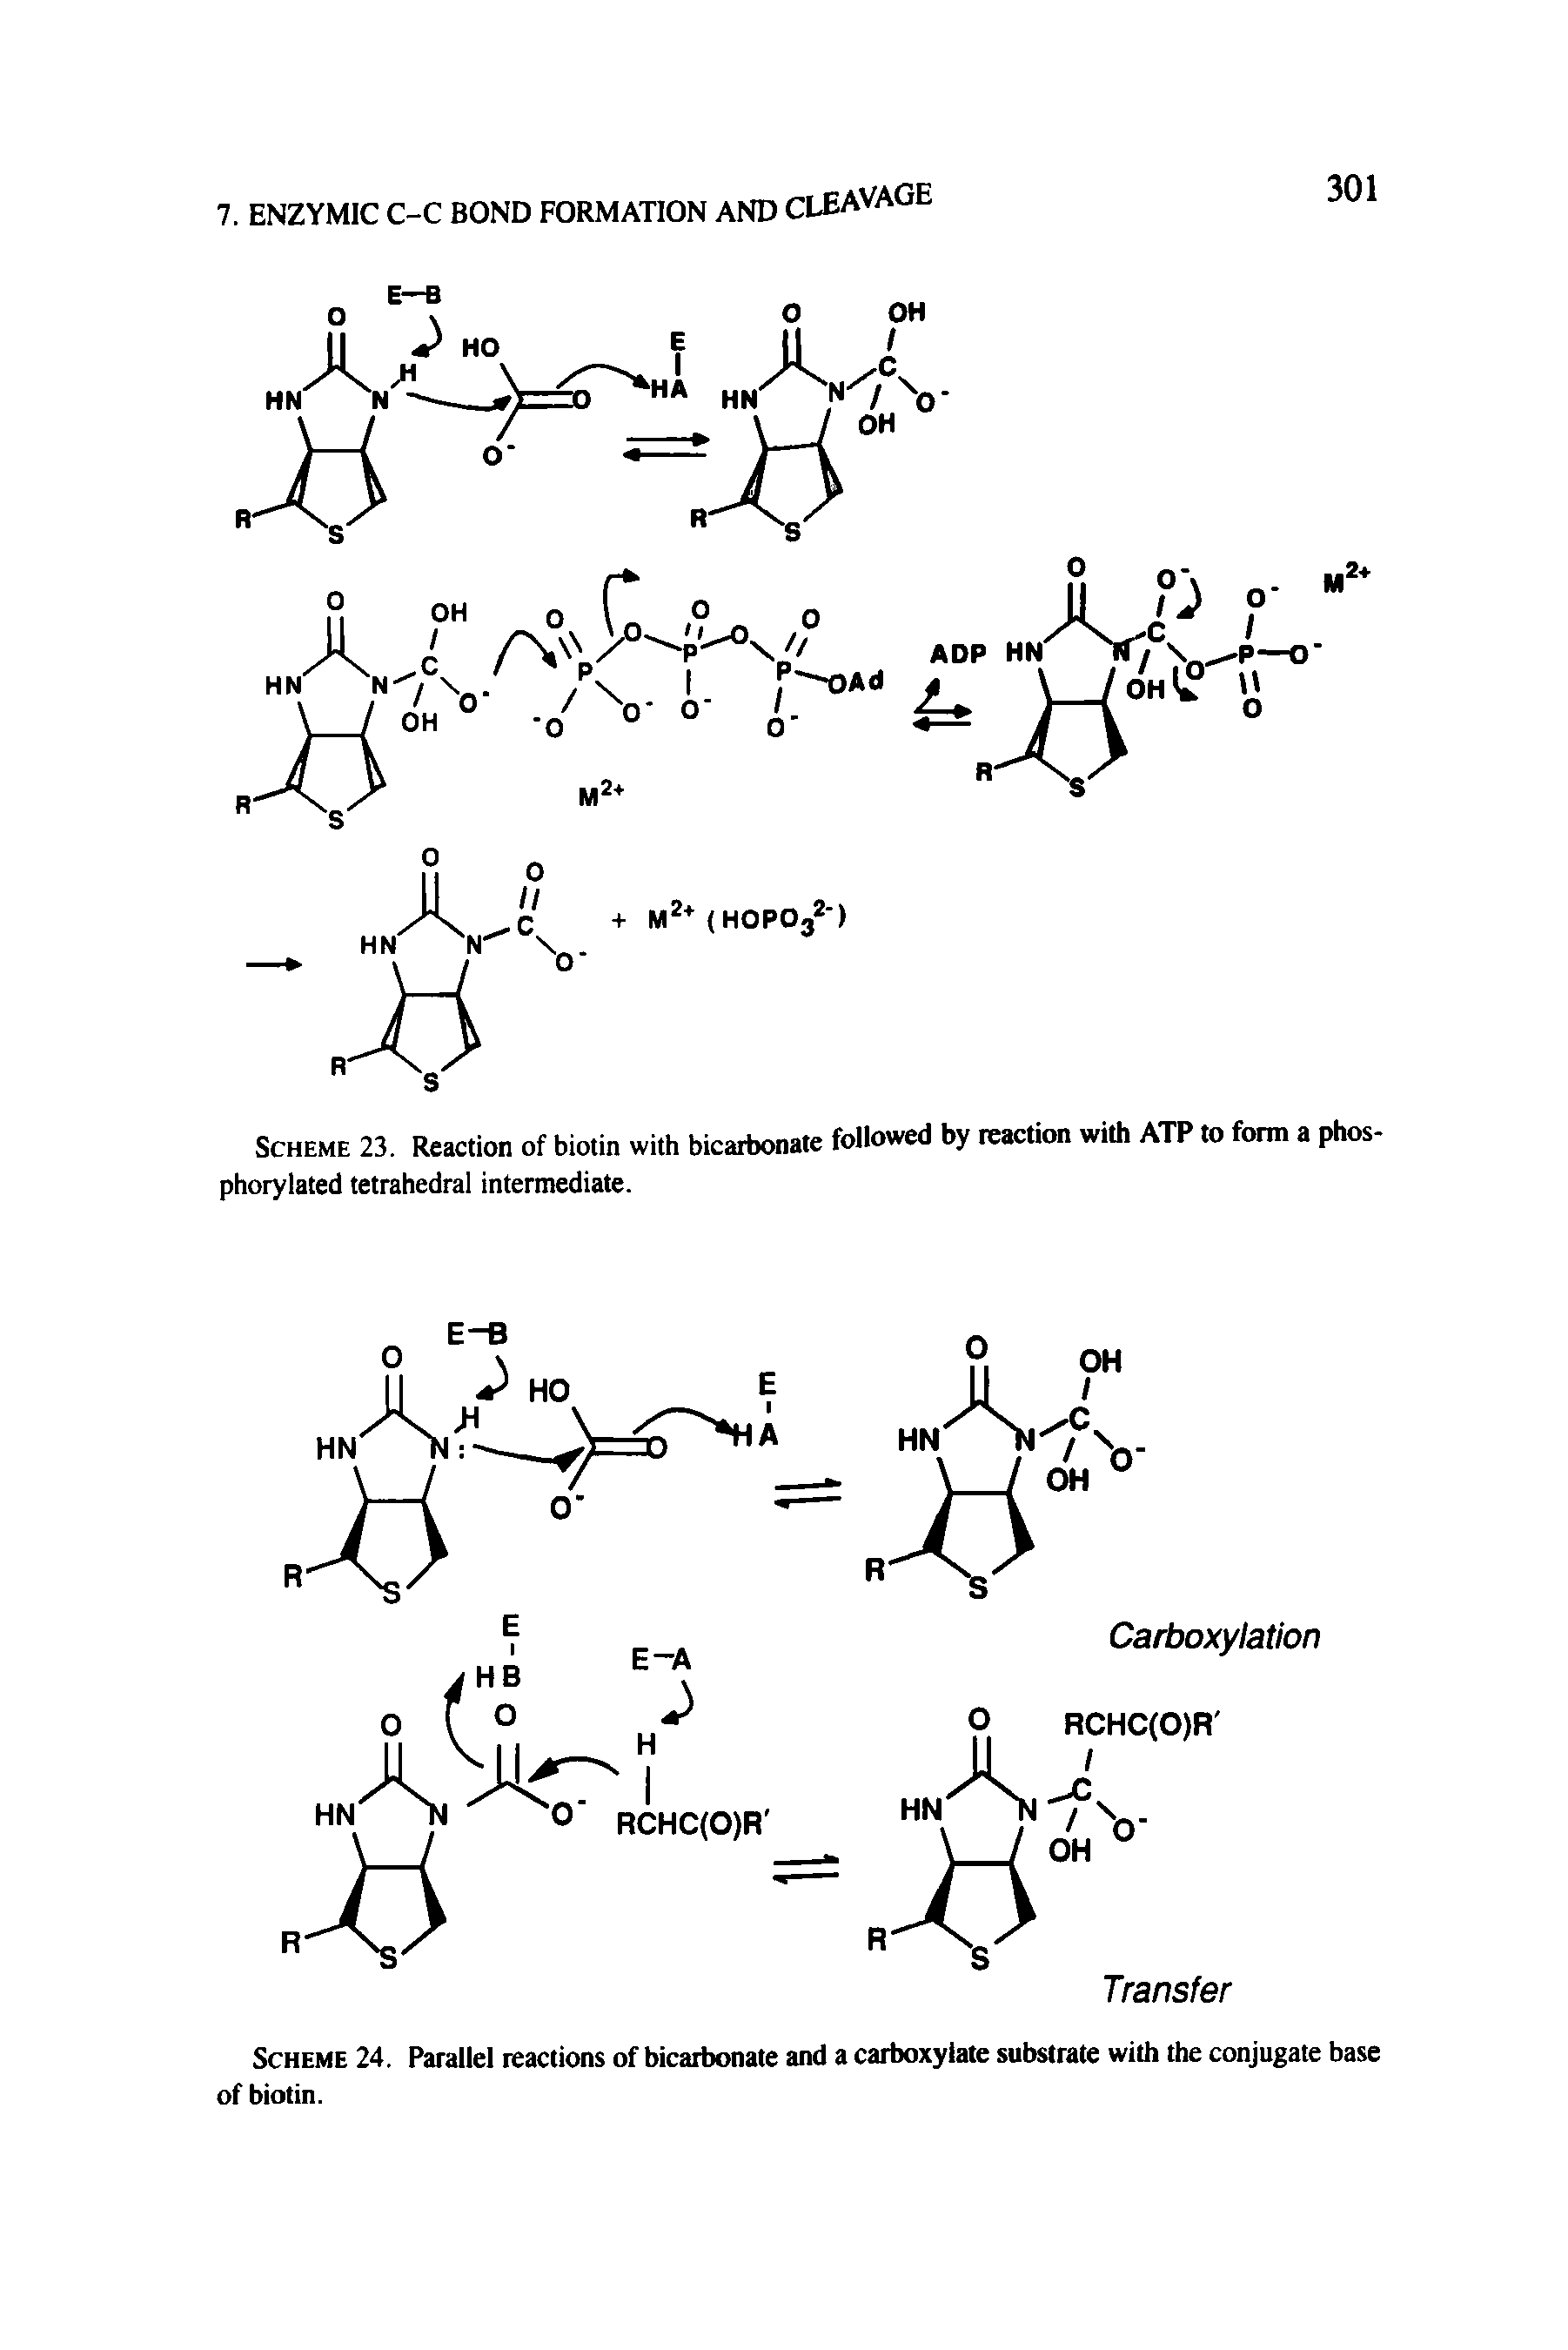 Scheme 23. Reaction of biotin with bicarbonate followed by reaction with ATP to form a phos-phorylated tetrahedral intermediate.